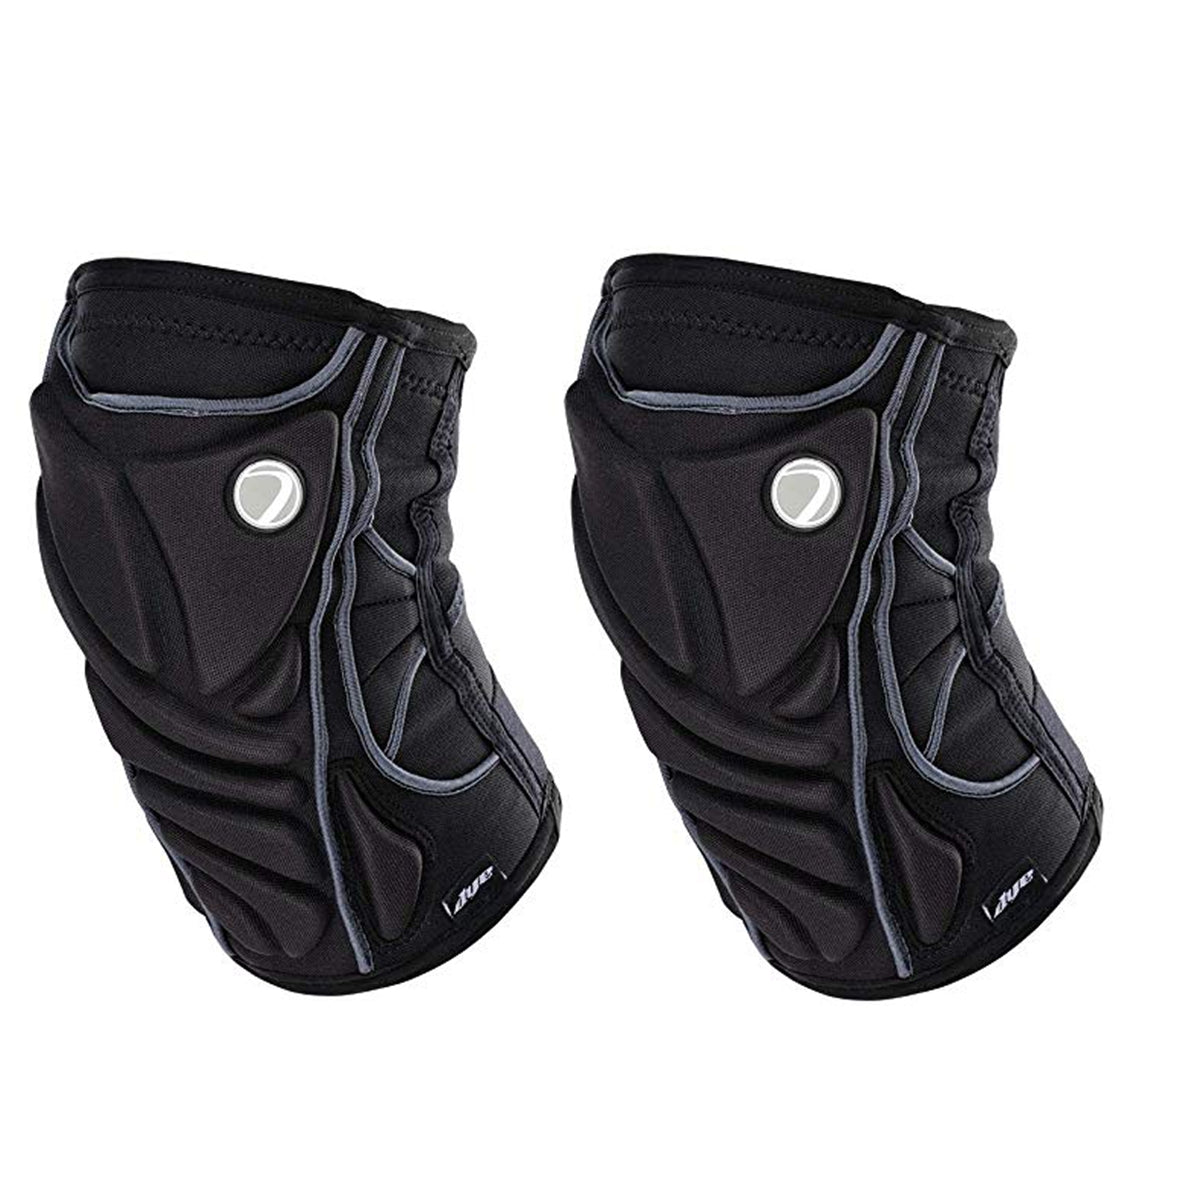 Airsoft Protection Package (Dye i4 Mask, Knee Pads, & Elbow Pads) - ssairsoft